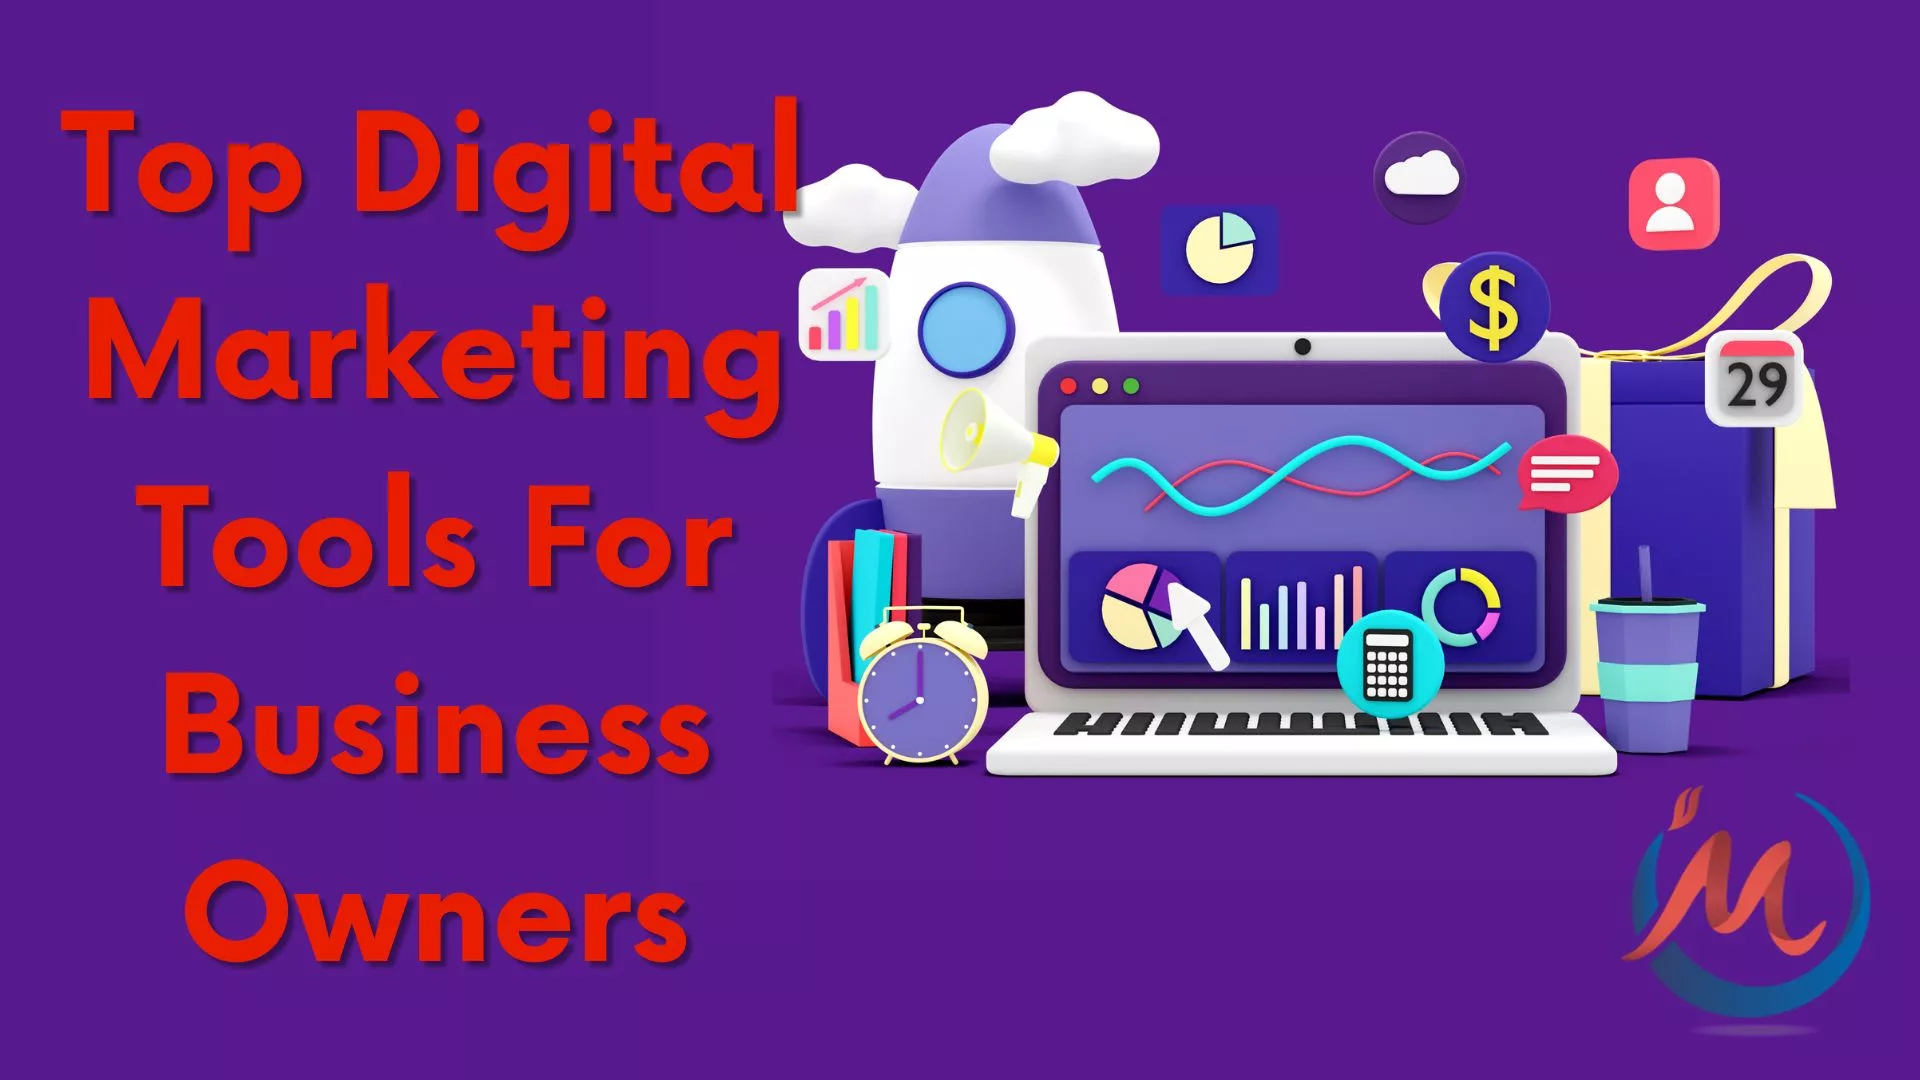 Digital Marketing Tools For Business Owners